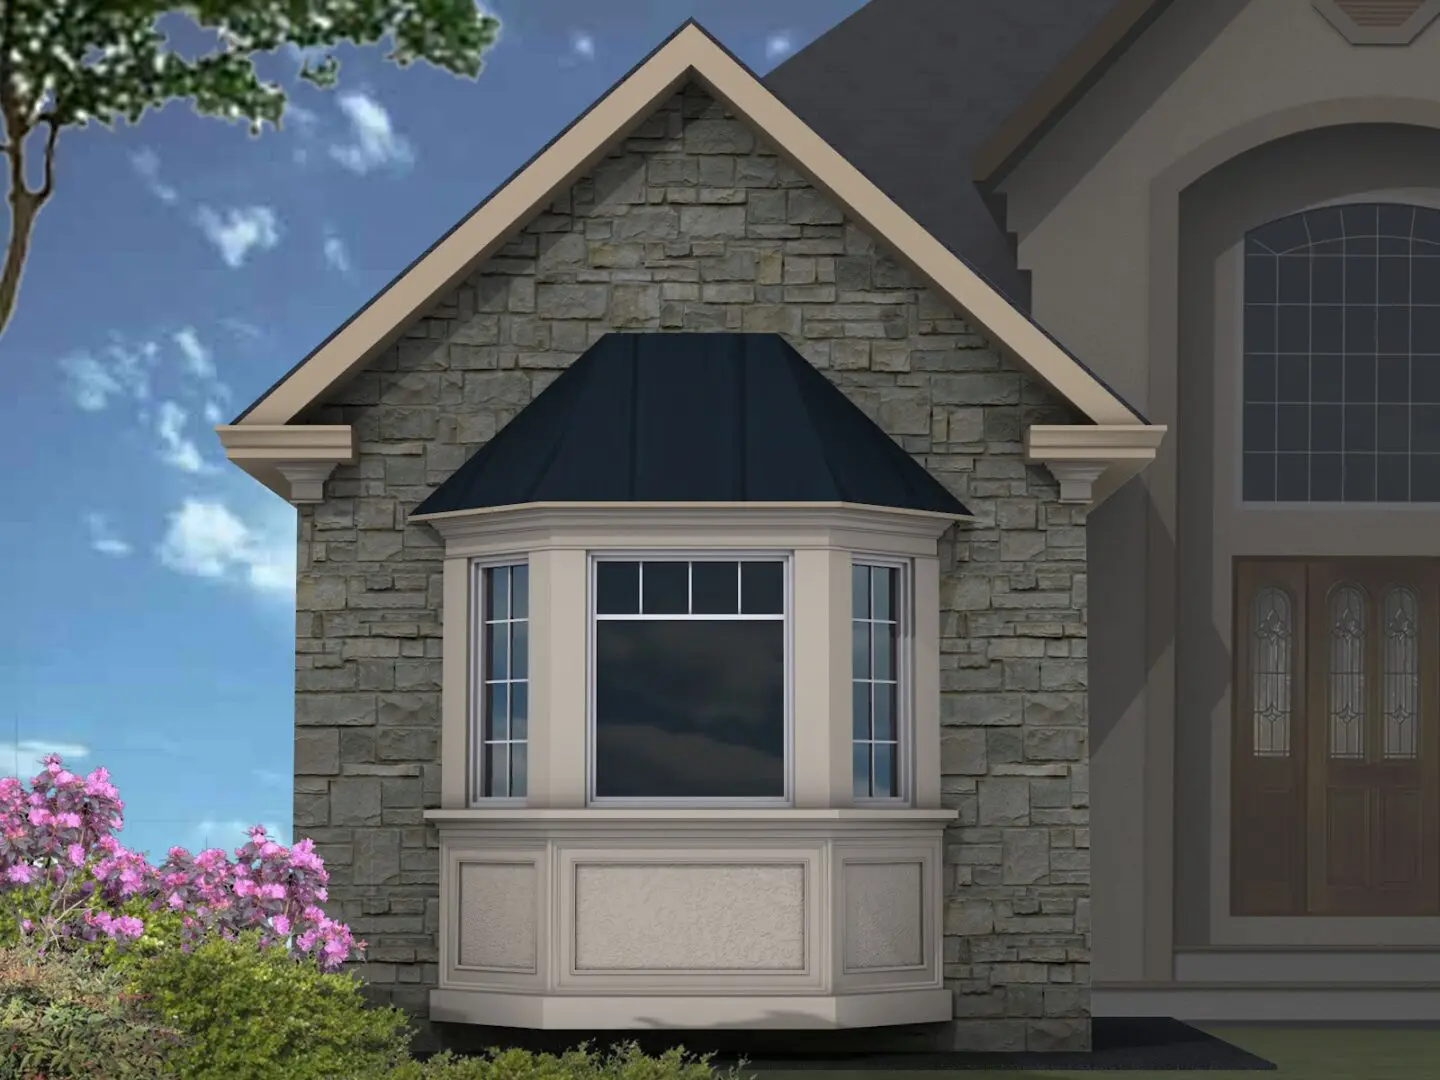 A rendering of the front window of a house.